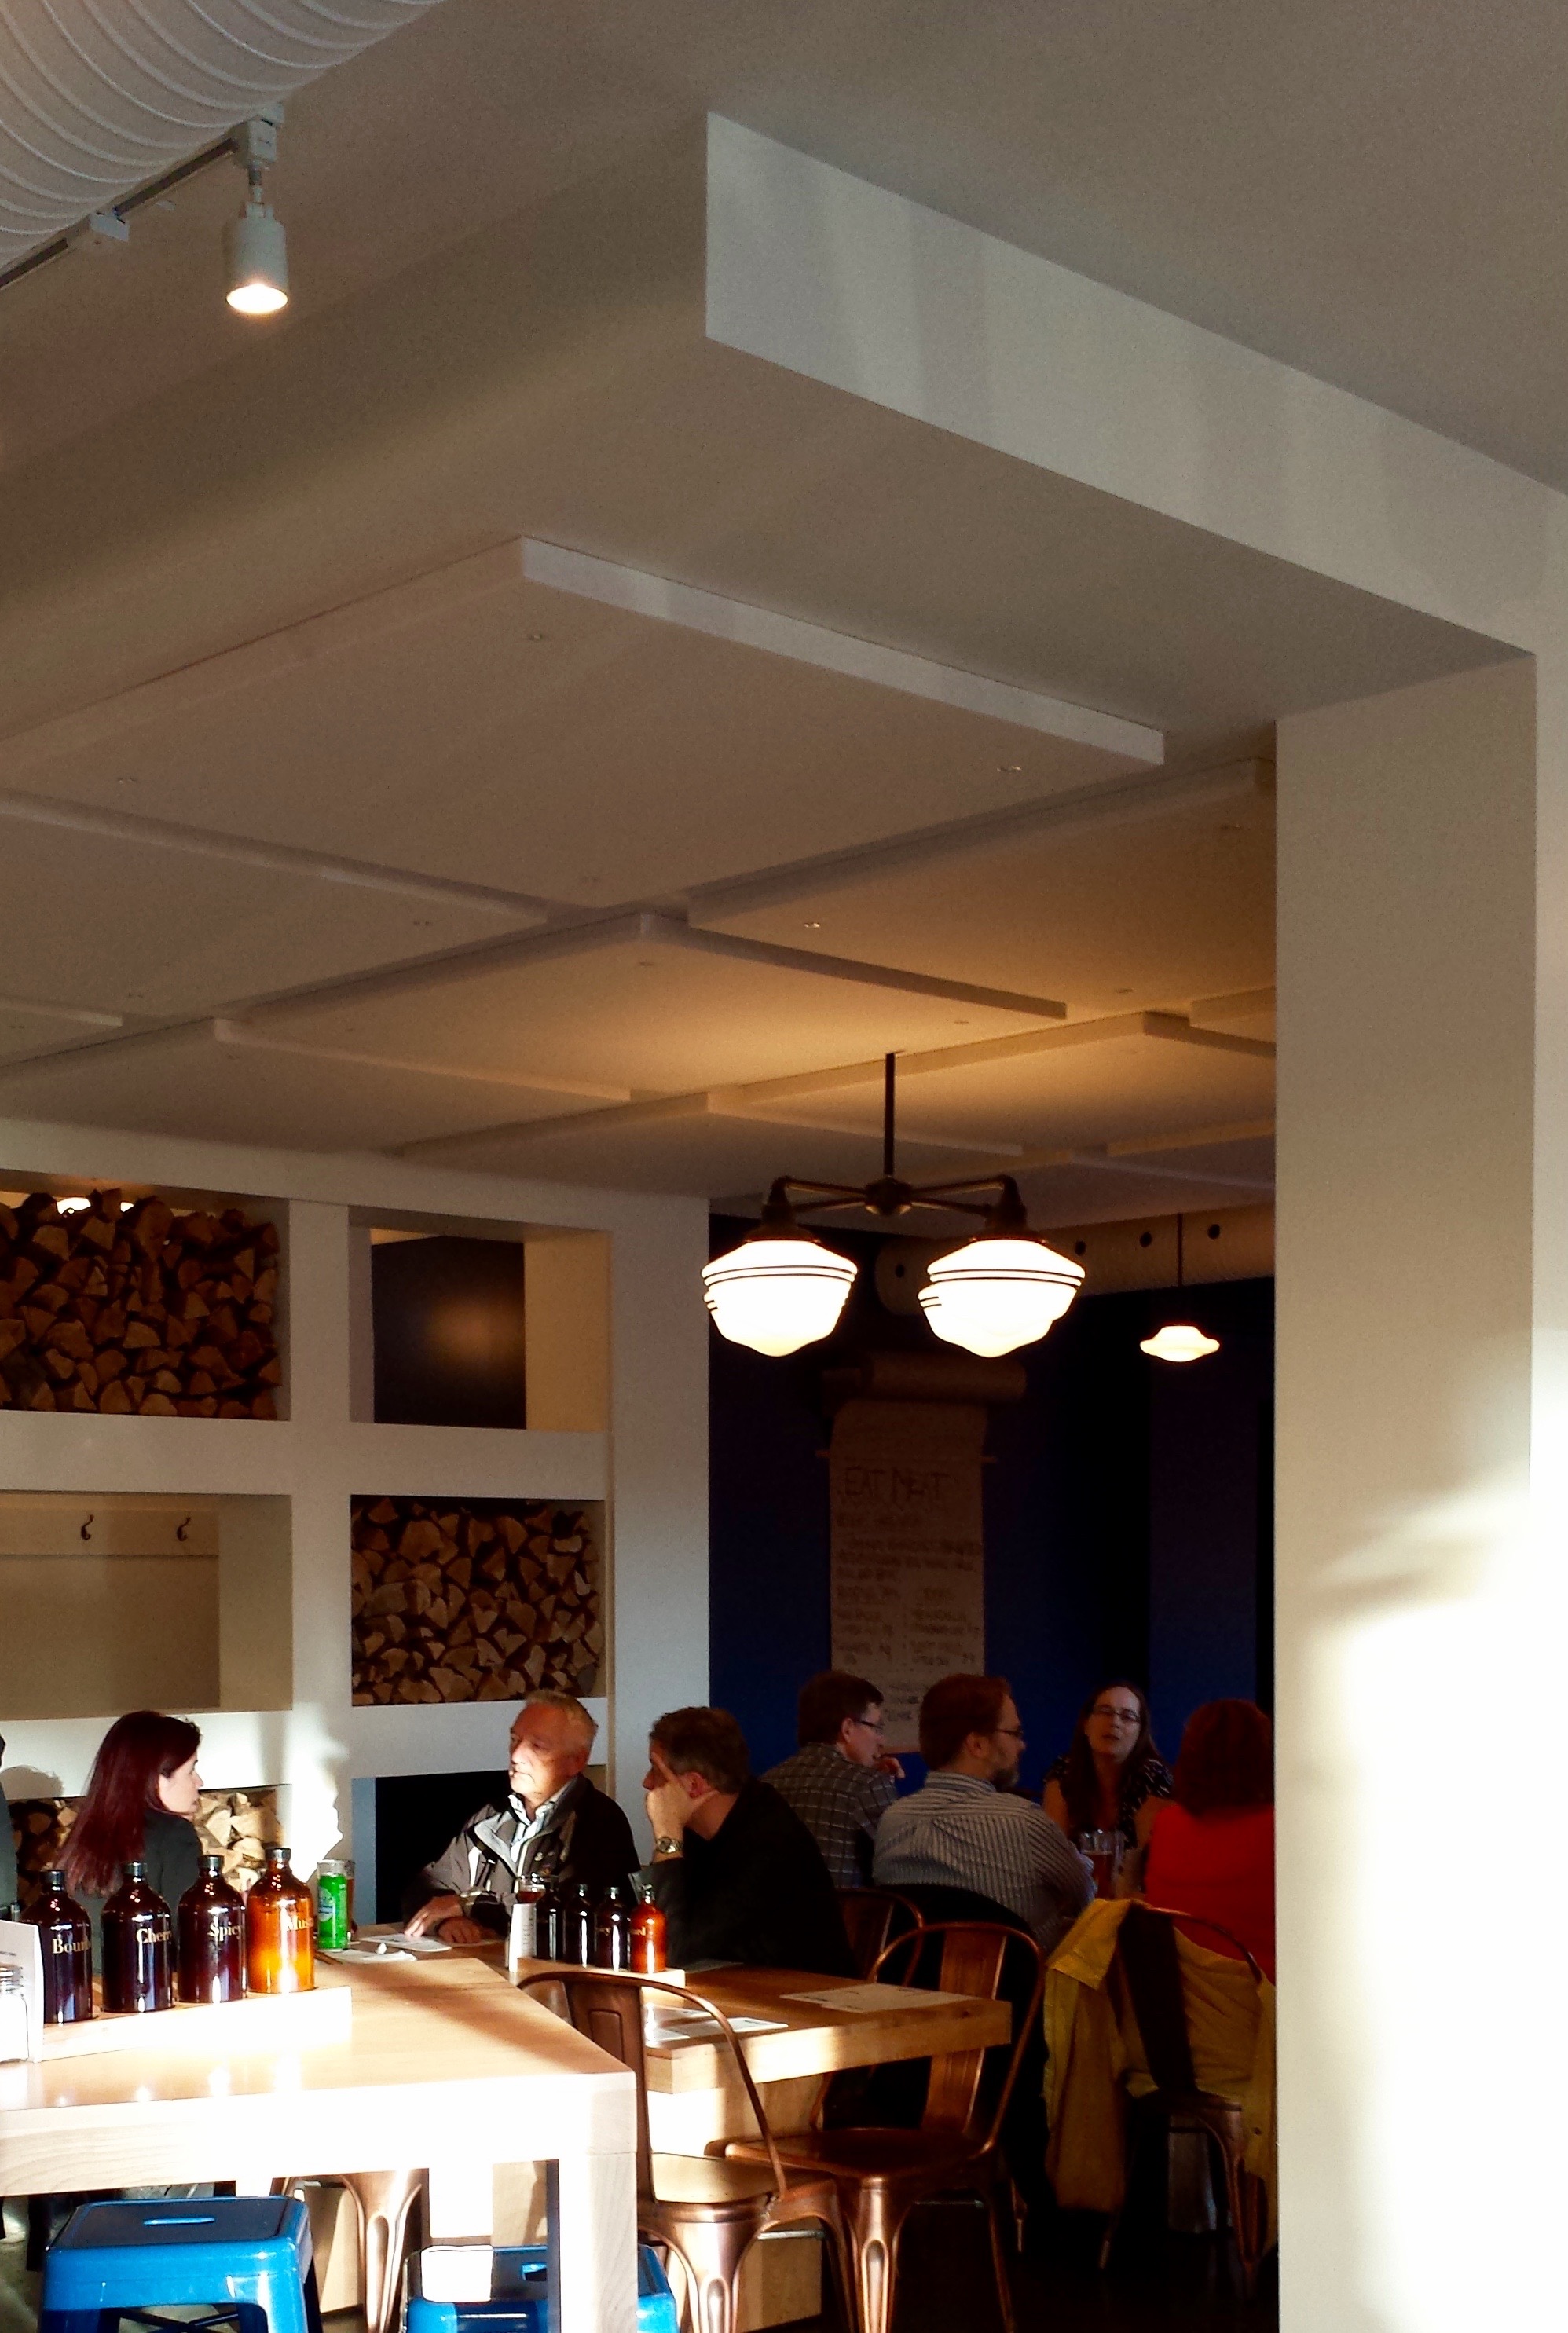 Restaurant noise level helped with ceiling acoustic panels 